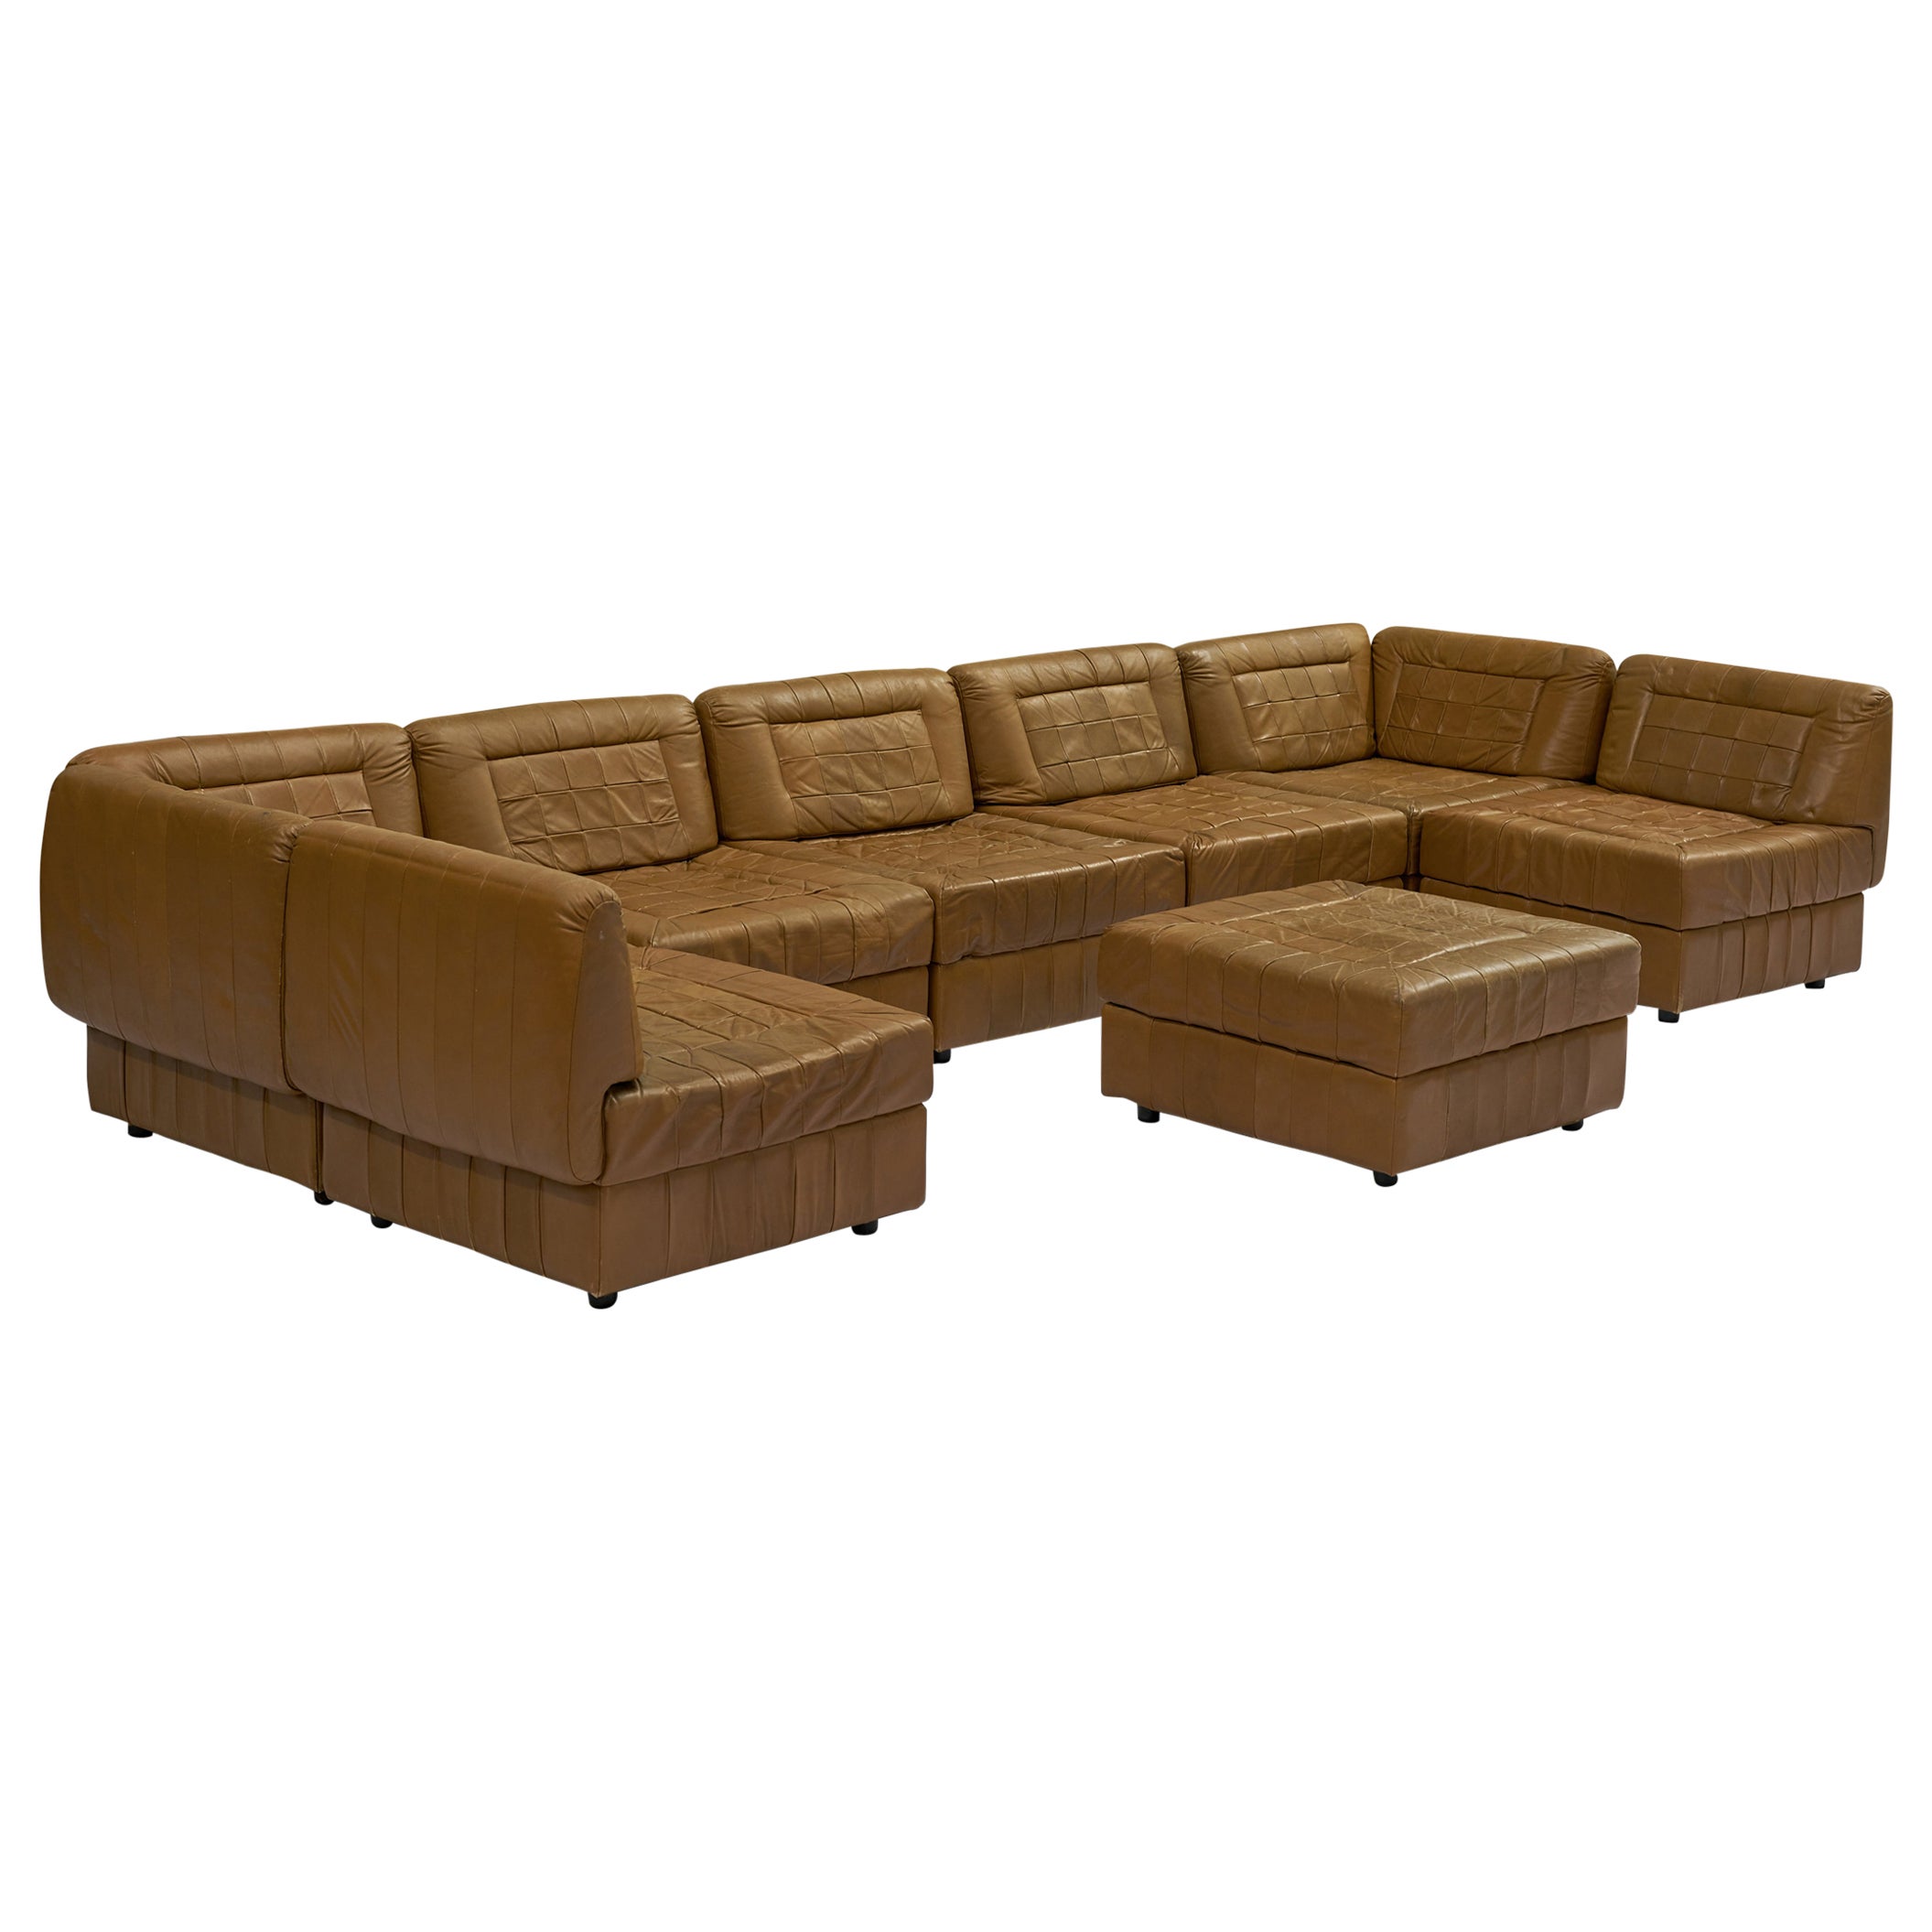 Percival Lafer leather modular seating set For Sale